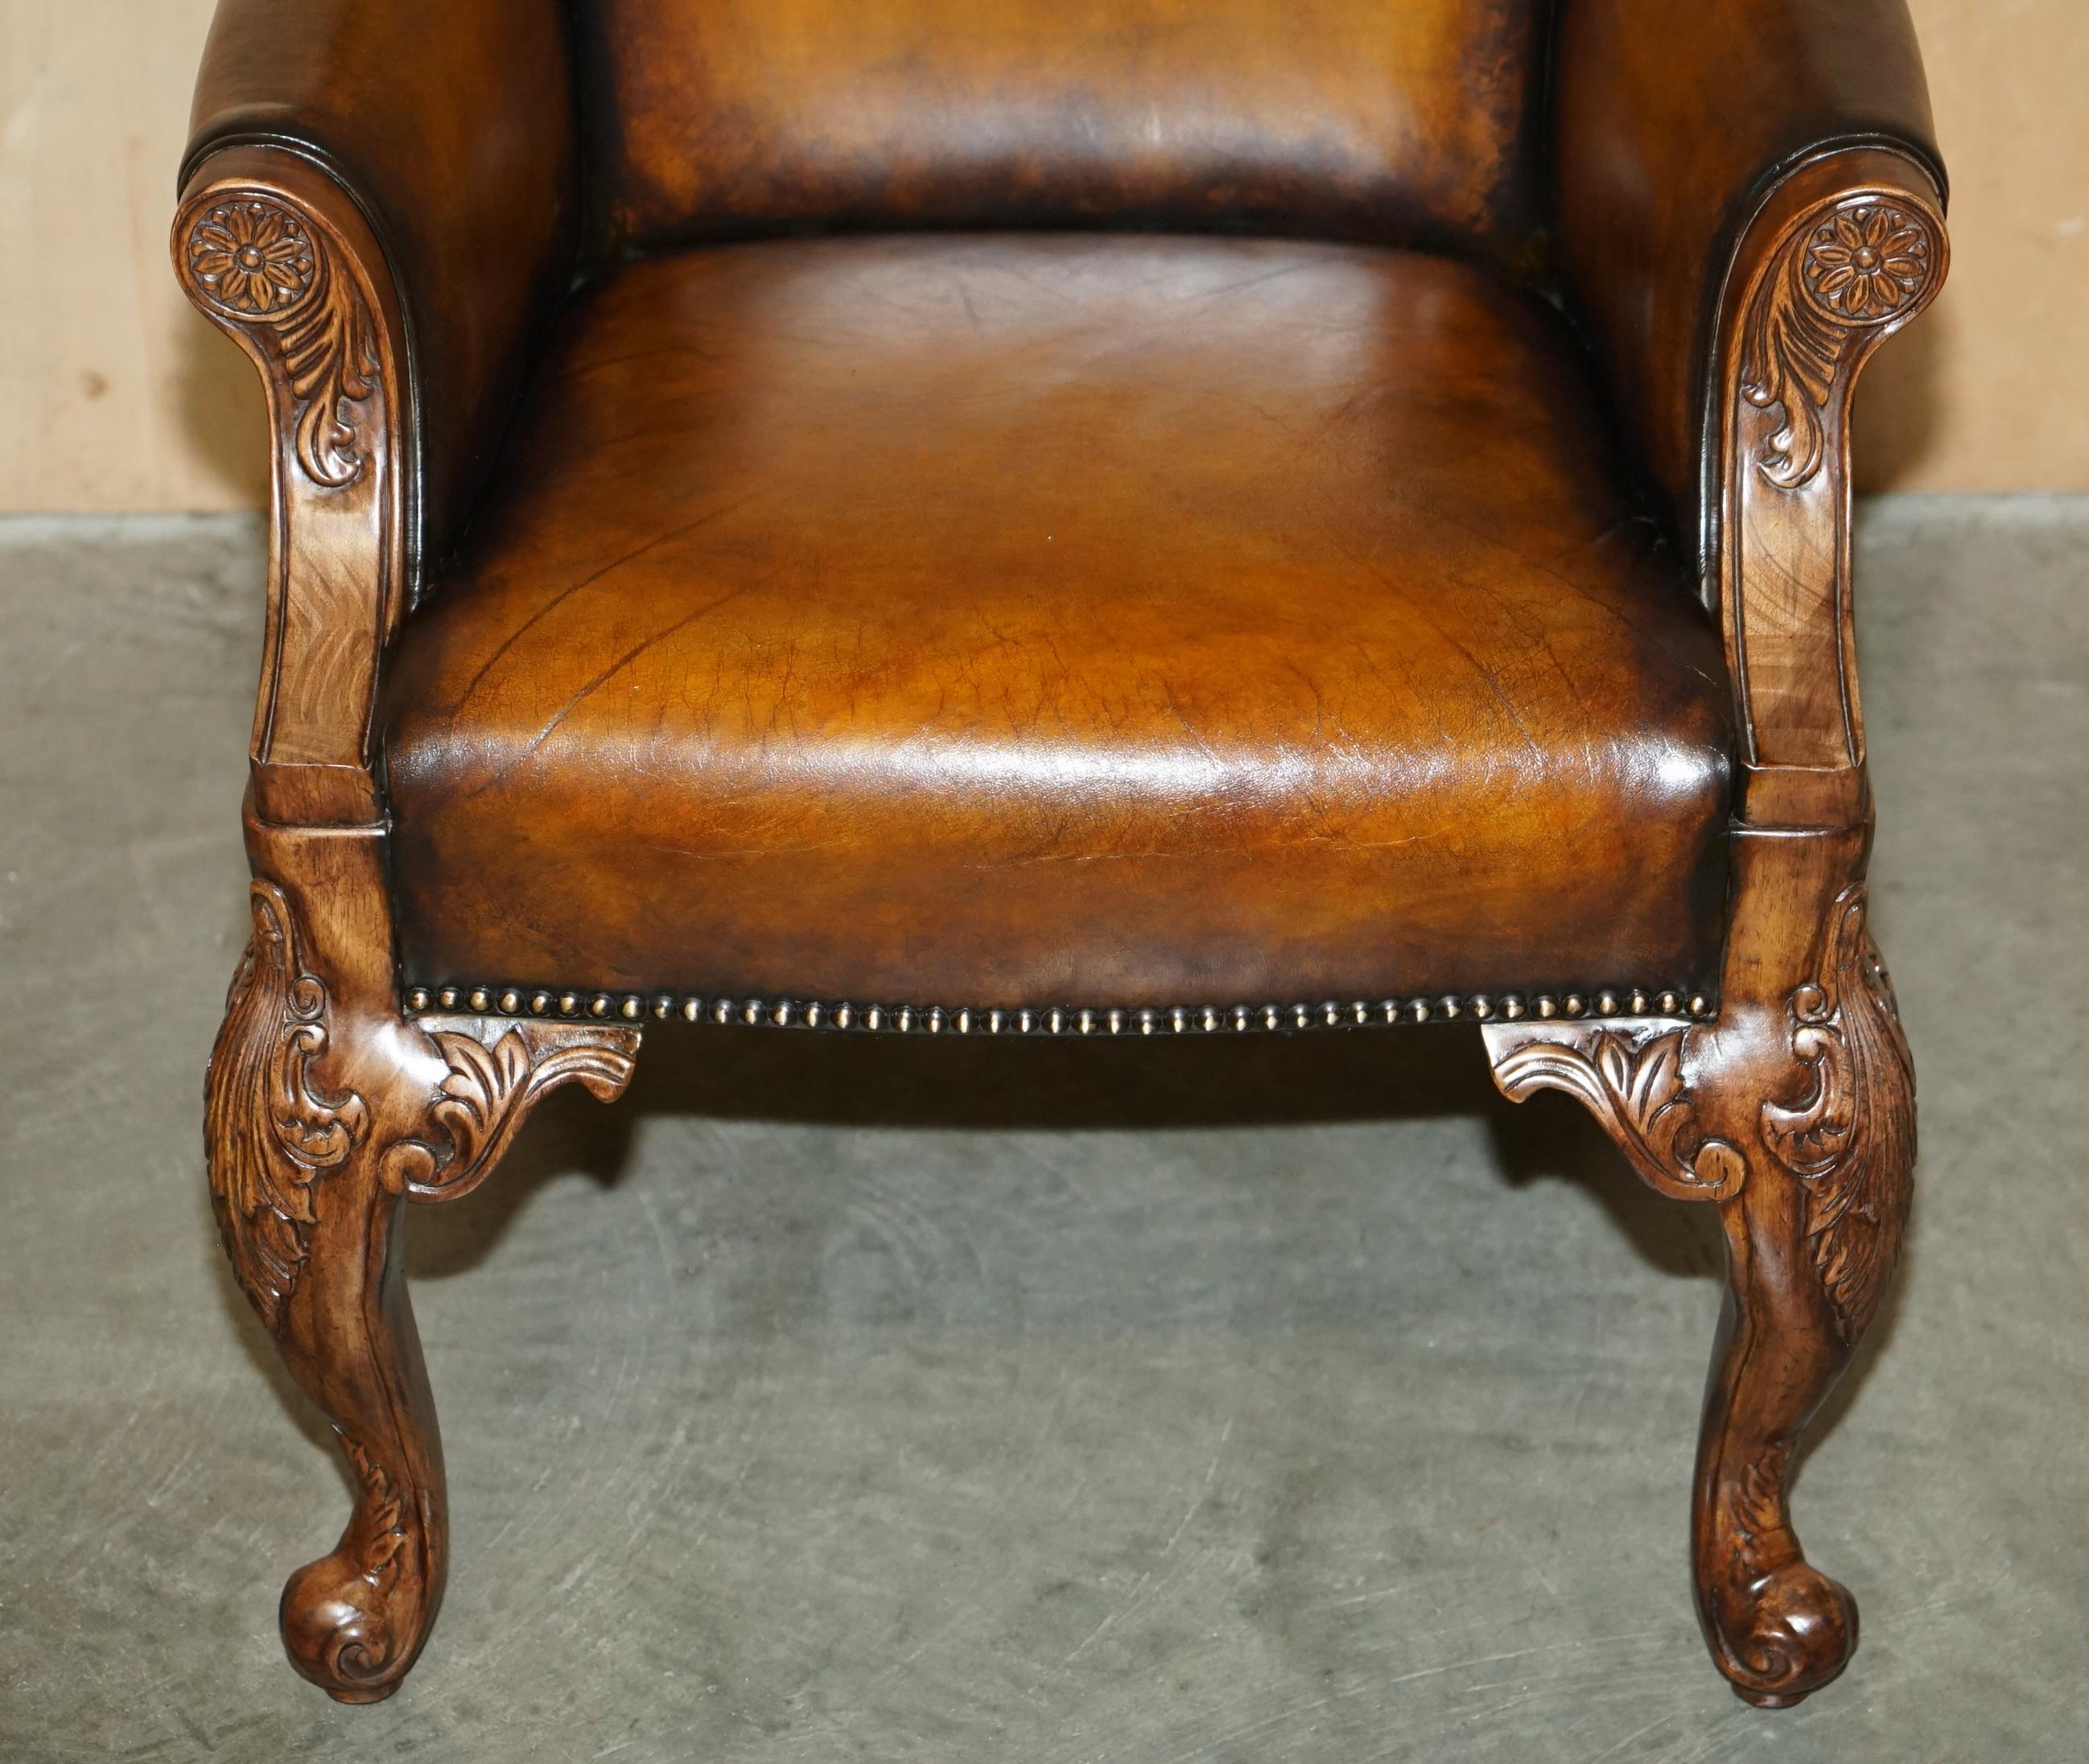 PAIR OF ANTIQUE HEAVILY CARved HAND DYED BROWN LEATHER RESTORED THRONE ARMCHAIRs (20. Jahrhundert) im Angebot